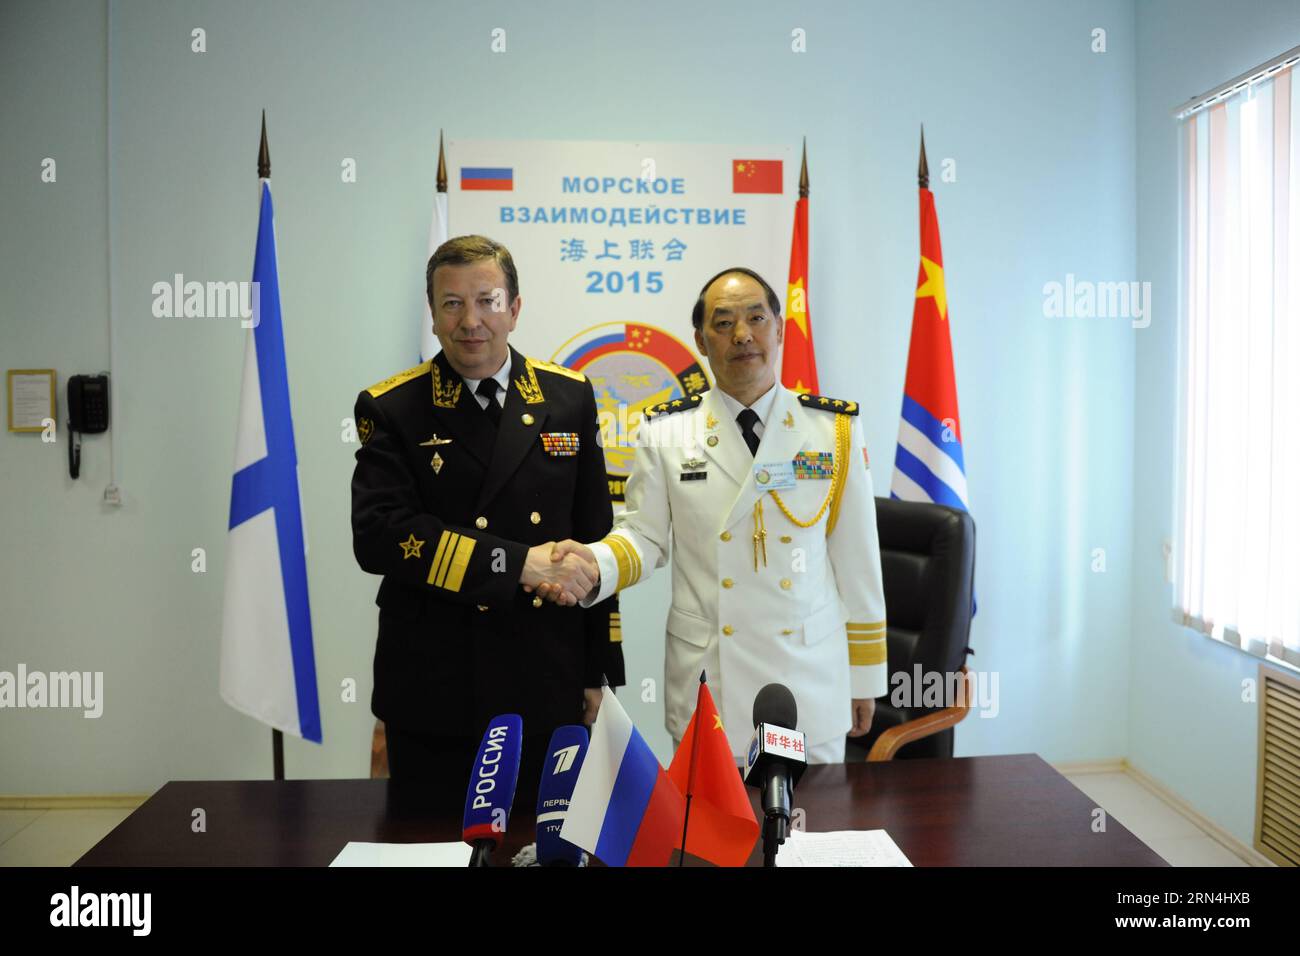 (150521) -- NOVOROSSIYSK, May 21, 2015 -- Du Jingchen(R), deputy commander of the Navy of the People s Liberation Army of China shakes hands with Alexander Fedotenkov, deputy commander of the Russian Navy during a joint press conference in Novorossiysk, Russia, on May 21, 2015. Chinese and Russian naval forces on Thursday ended their joint military exercises in the Mediterranean, according to an online news briefing from the Chinese Defense Ministry. ) RUSSIA-NOVOROSSIYSK-CHINA-JOINT NAVAL EXERCISES DaixTianfang PUBLICATIONxNOTxINxCHN   150521 Novorossiysk May 21 2015 you Jingchen r Deputy Com Stock Photo